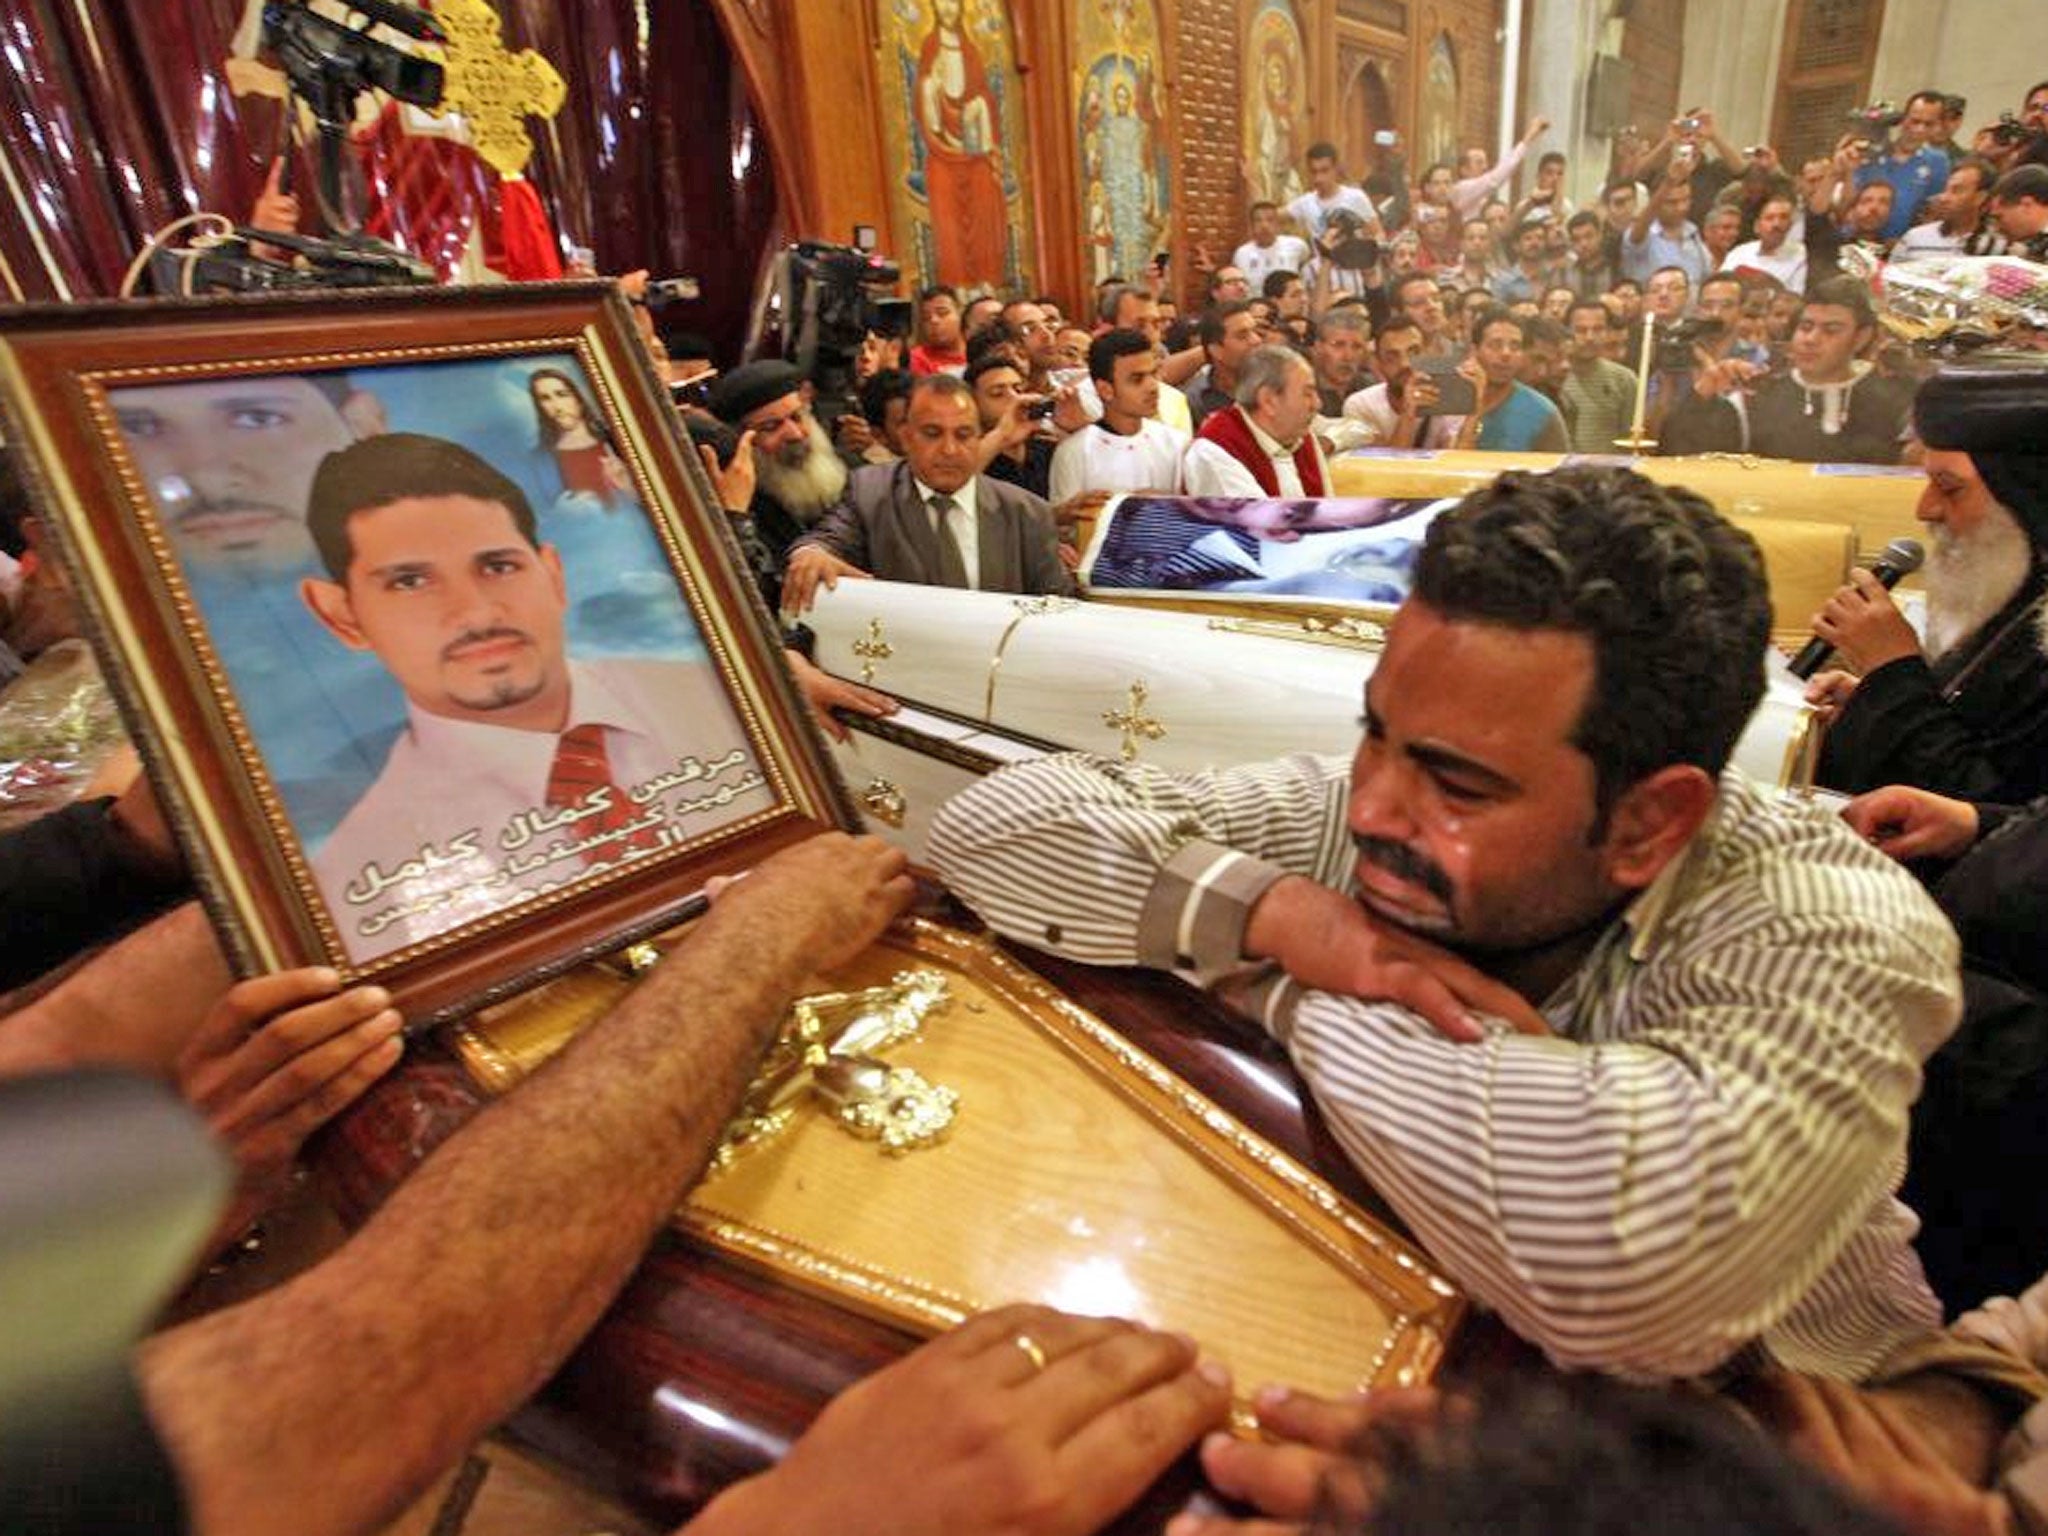 An Egyptian Coptic Christian mourns over the coffin of a relative killed in clashes yesterday, during the funeral mass at the Abbassiya Cathedral, in Cairo today